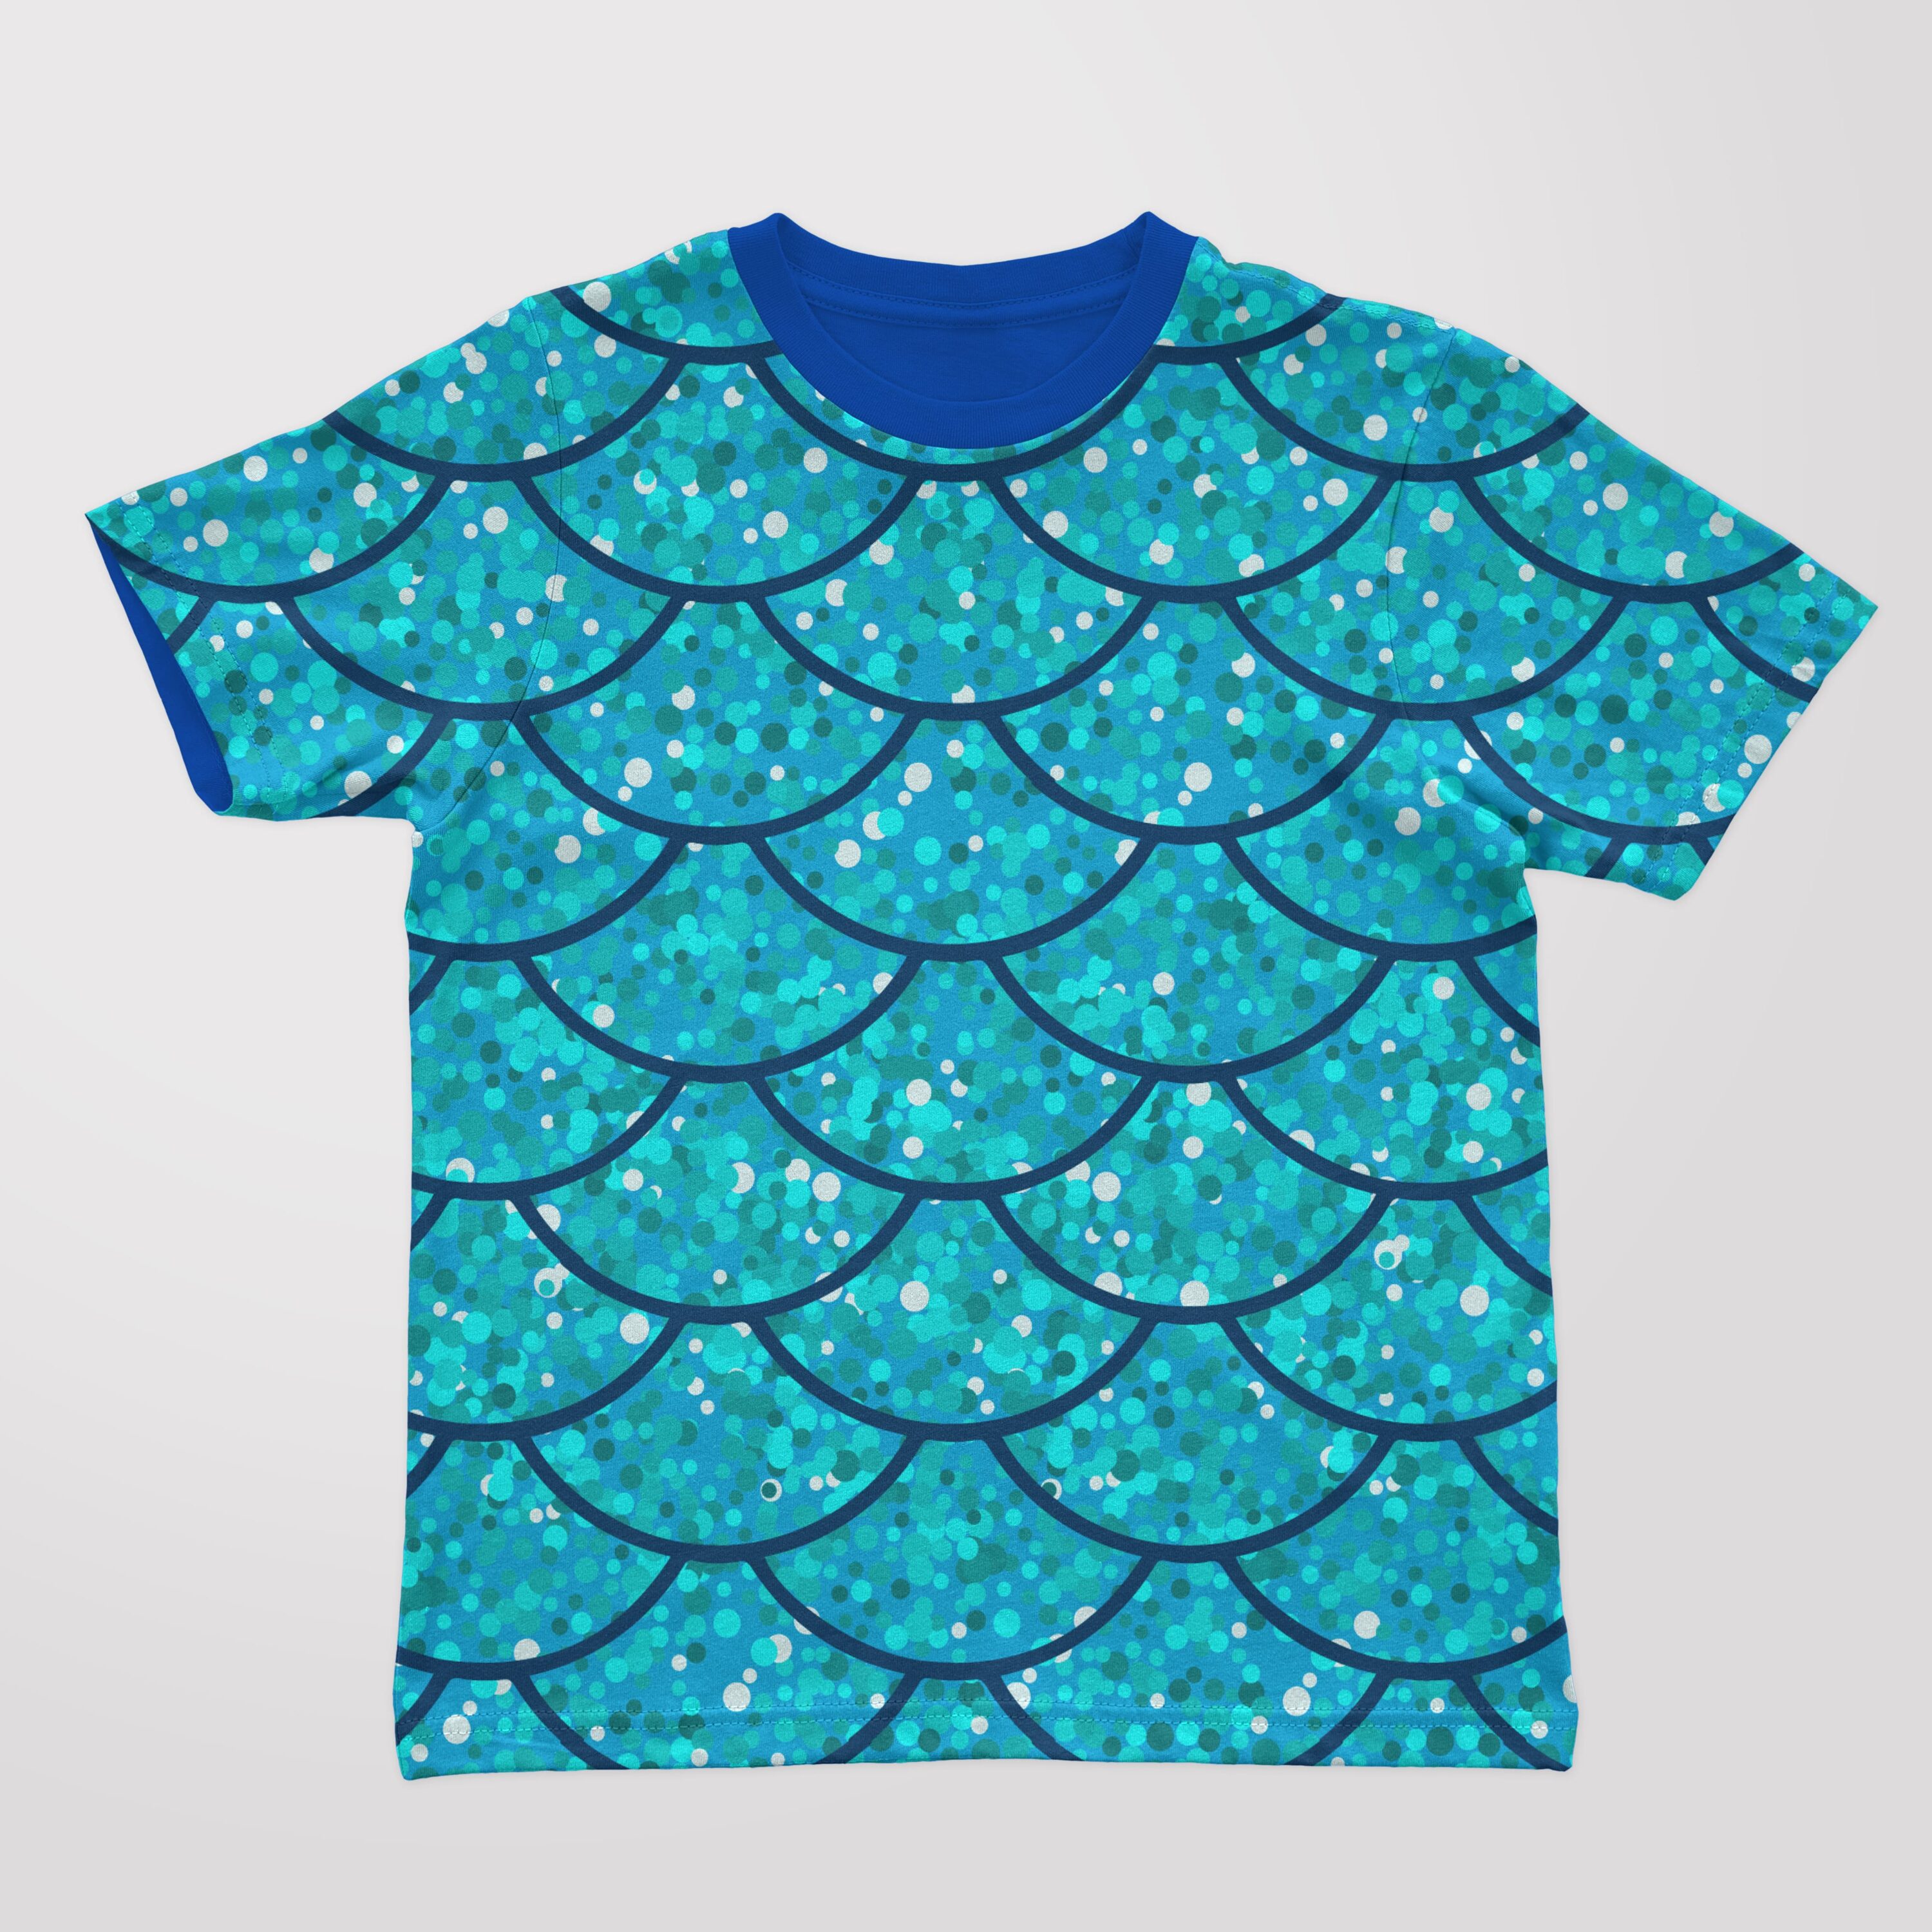 Blue glitter t-shirt with the scales illustration.